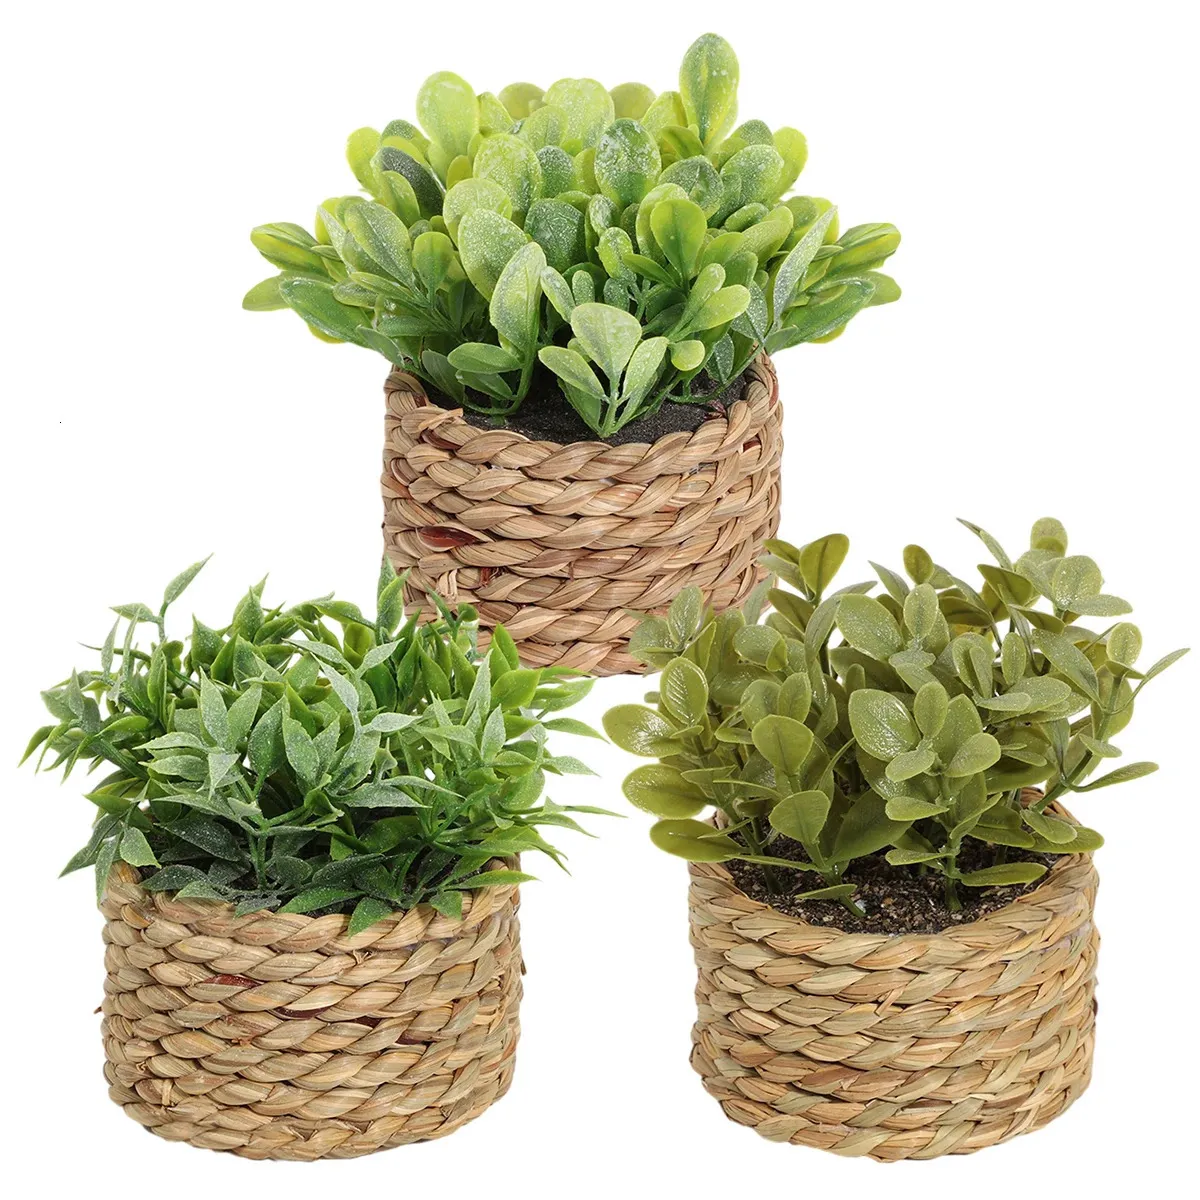 SIA FLOWER Green Artificial Plants Eucalyptus Grass Woven Small Potted Mound 11cm PE Material Home Decoration 240411